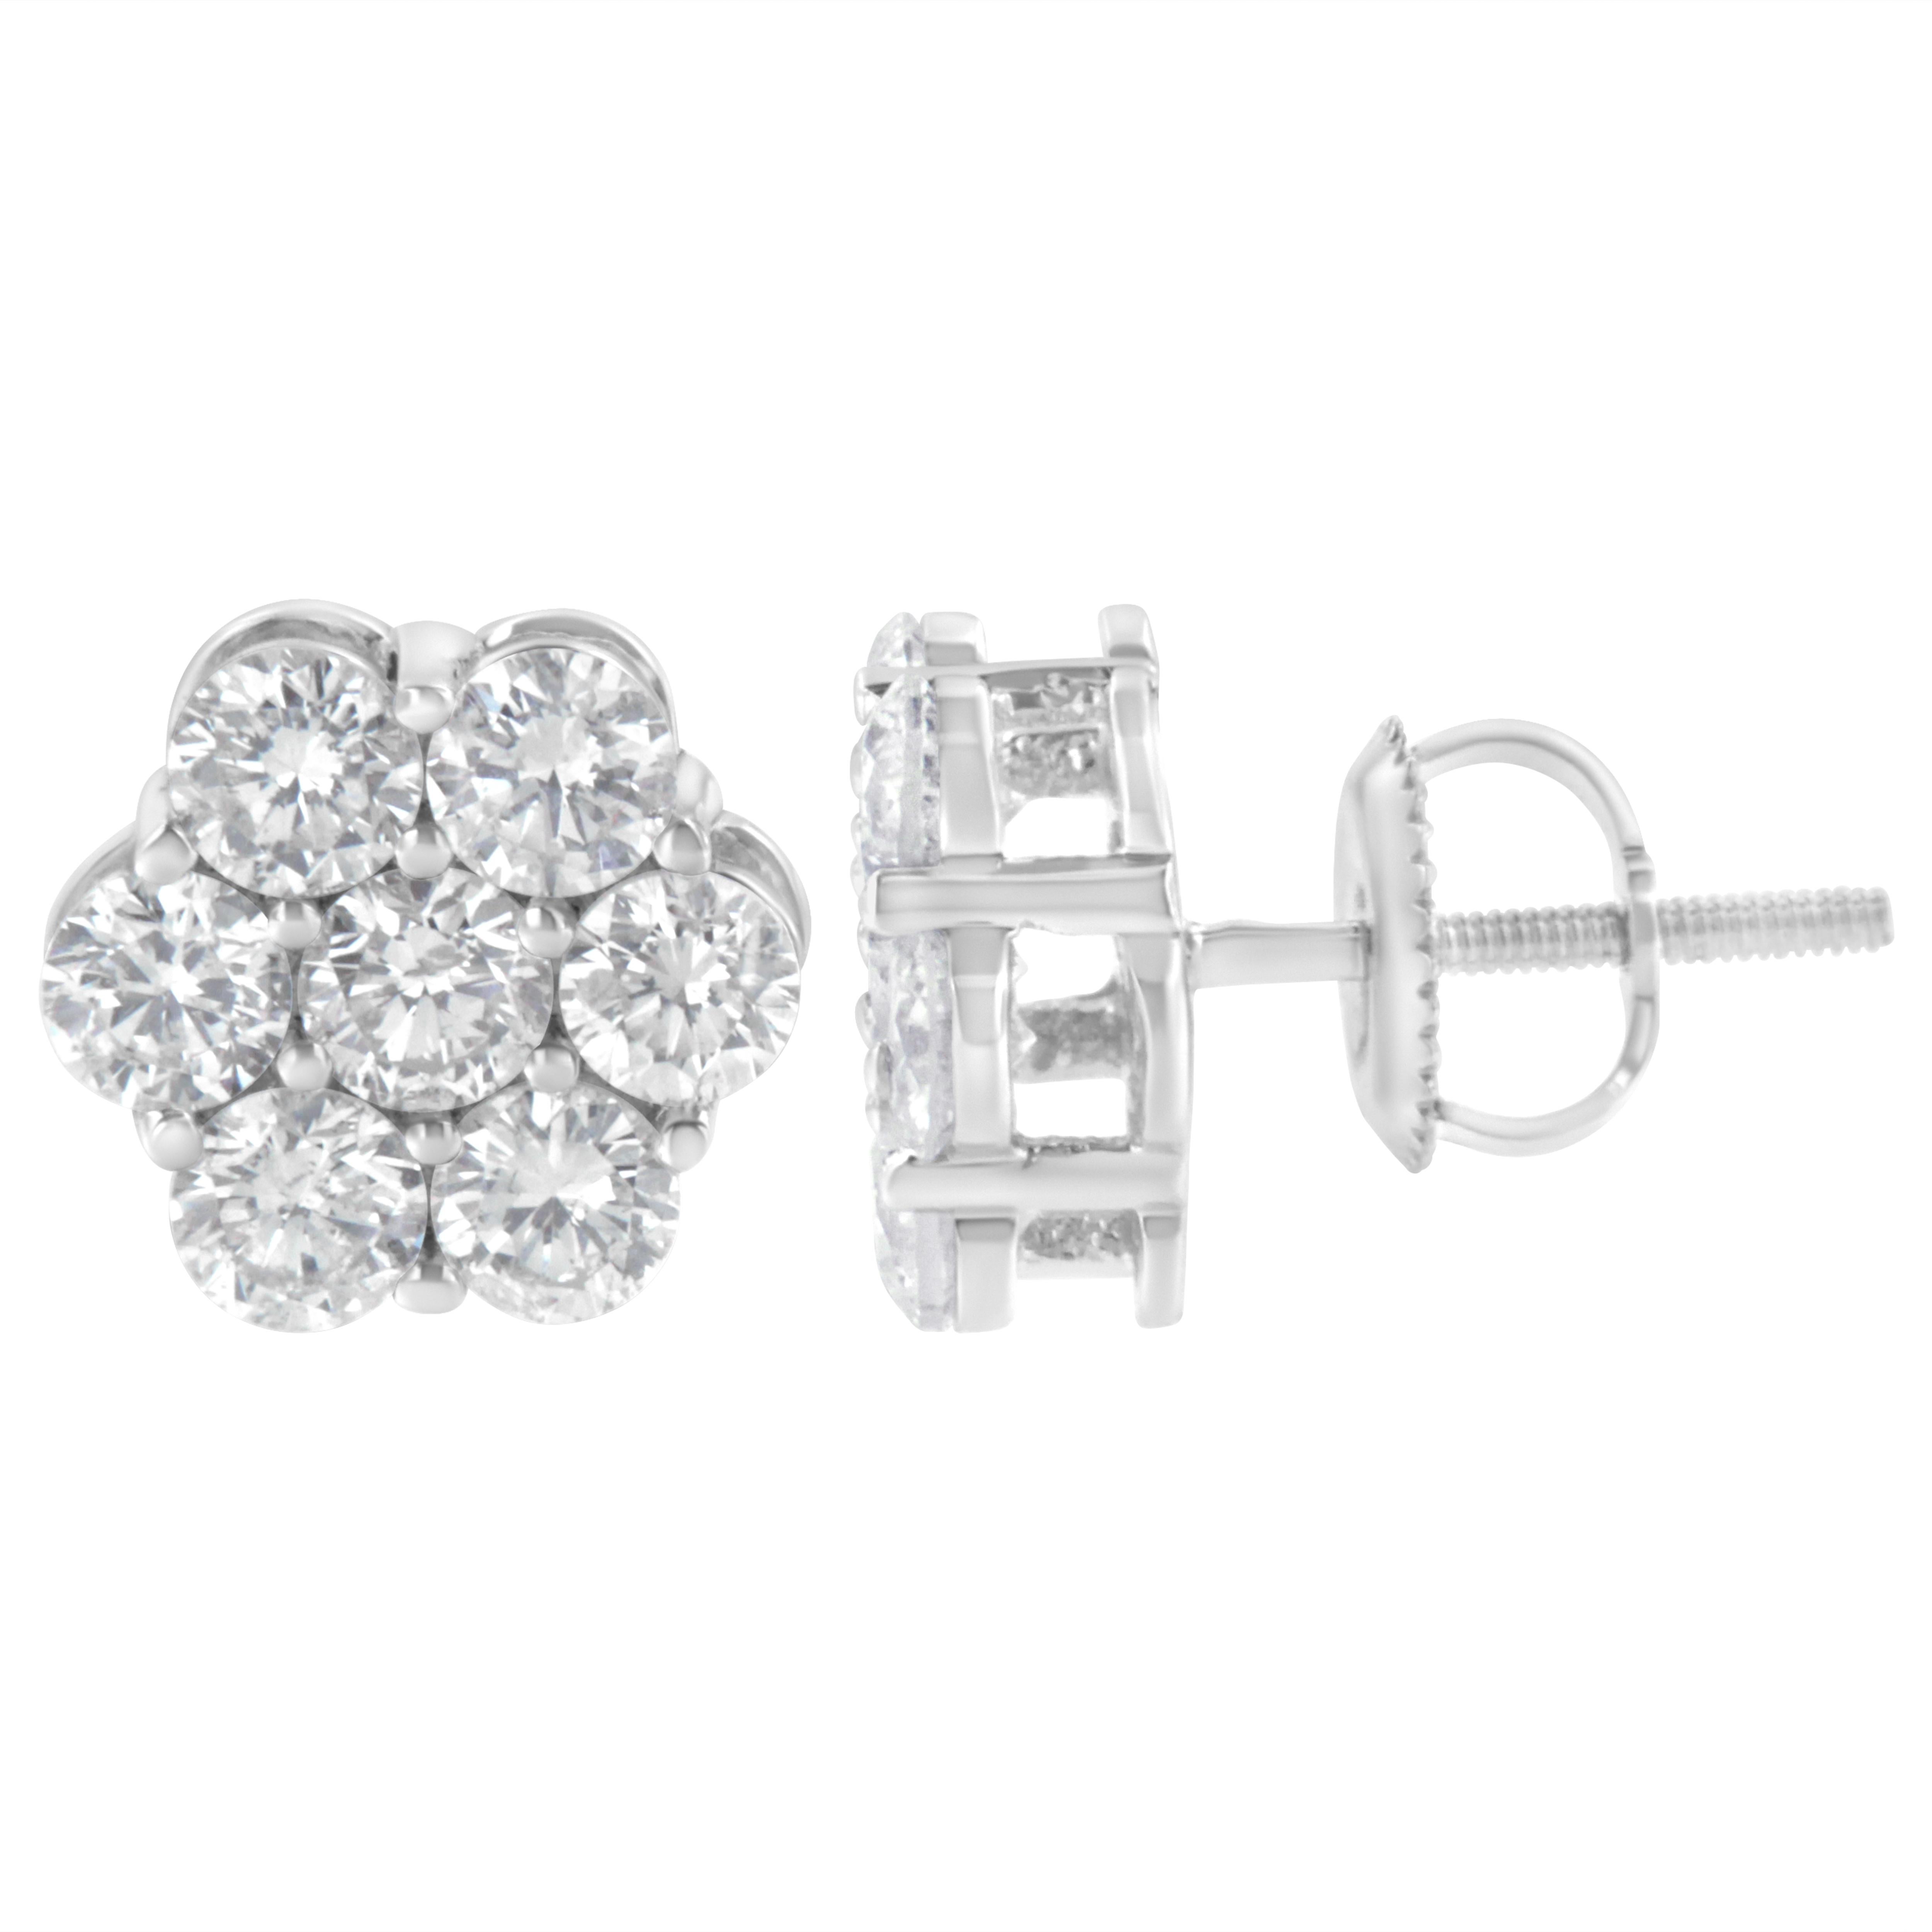 These gorgeous floral cluster studs are designed with 7, natural round-cut diamonds each. Designed in the finest .925 sterling silver, these earrings boast an impressive total diamond weight of 2 ct. These prong-set pieces are the perfect accessory